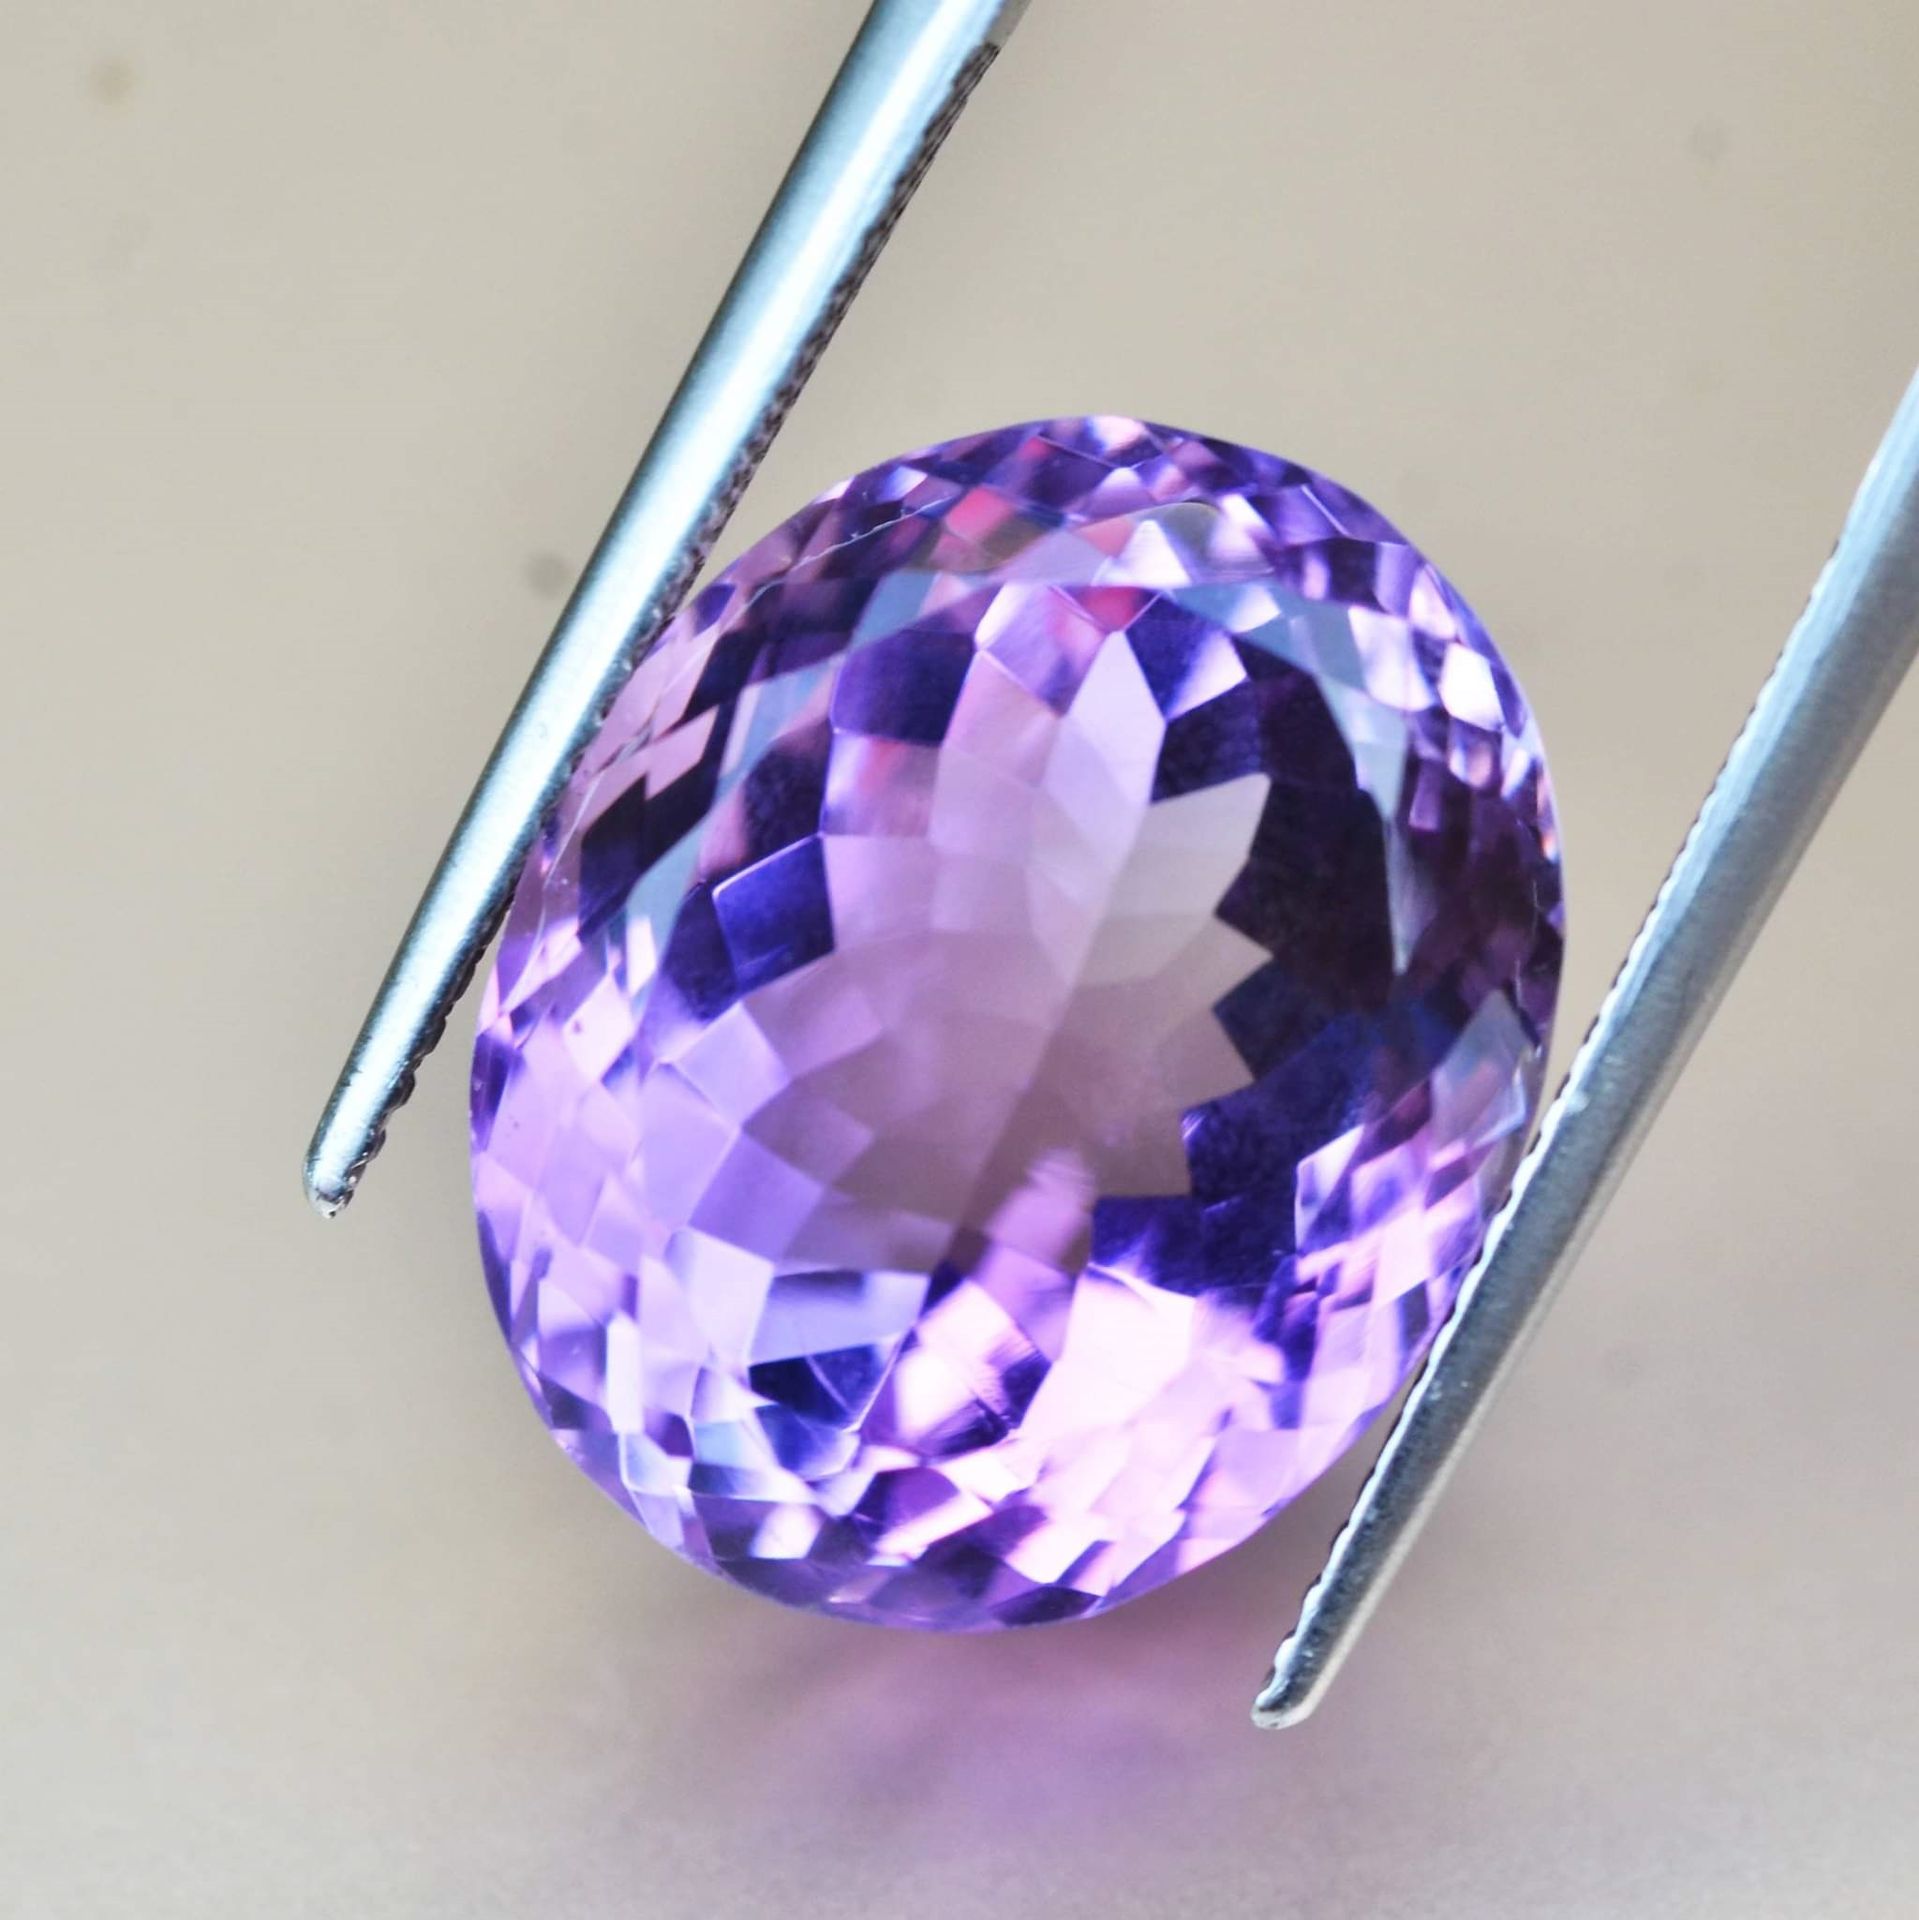 AMETHYSTE 18.34 CT- MADAGASCAR EXCEPTIONAL NATURAL AMETHYST FROM BRAZIL

 - Weig&hellip;